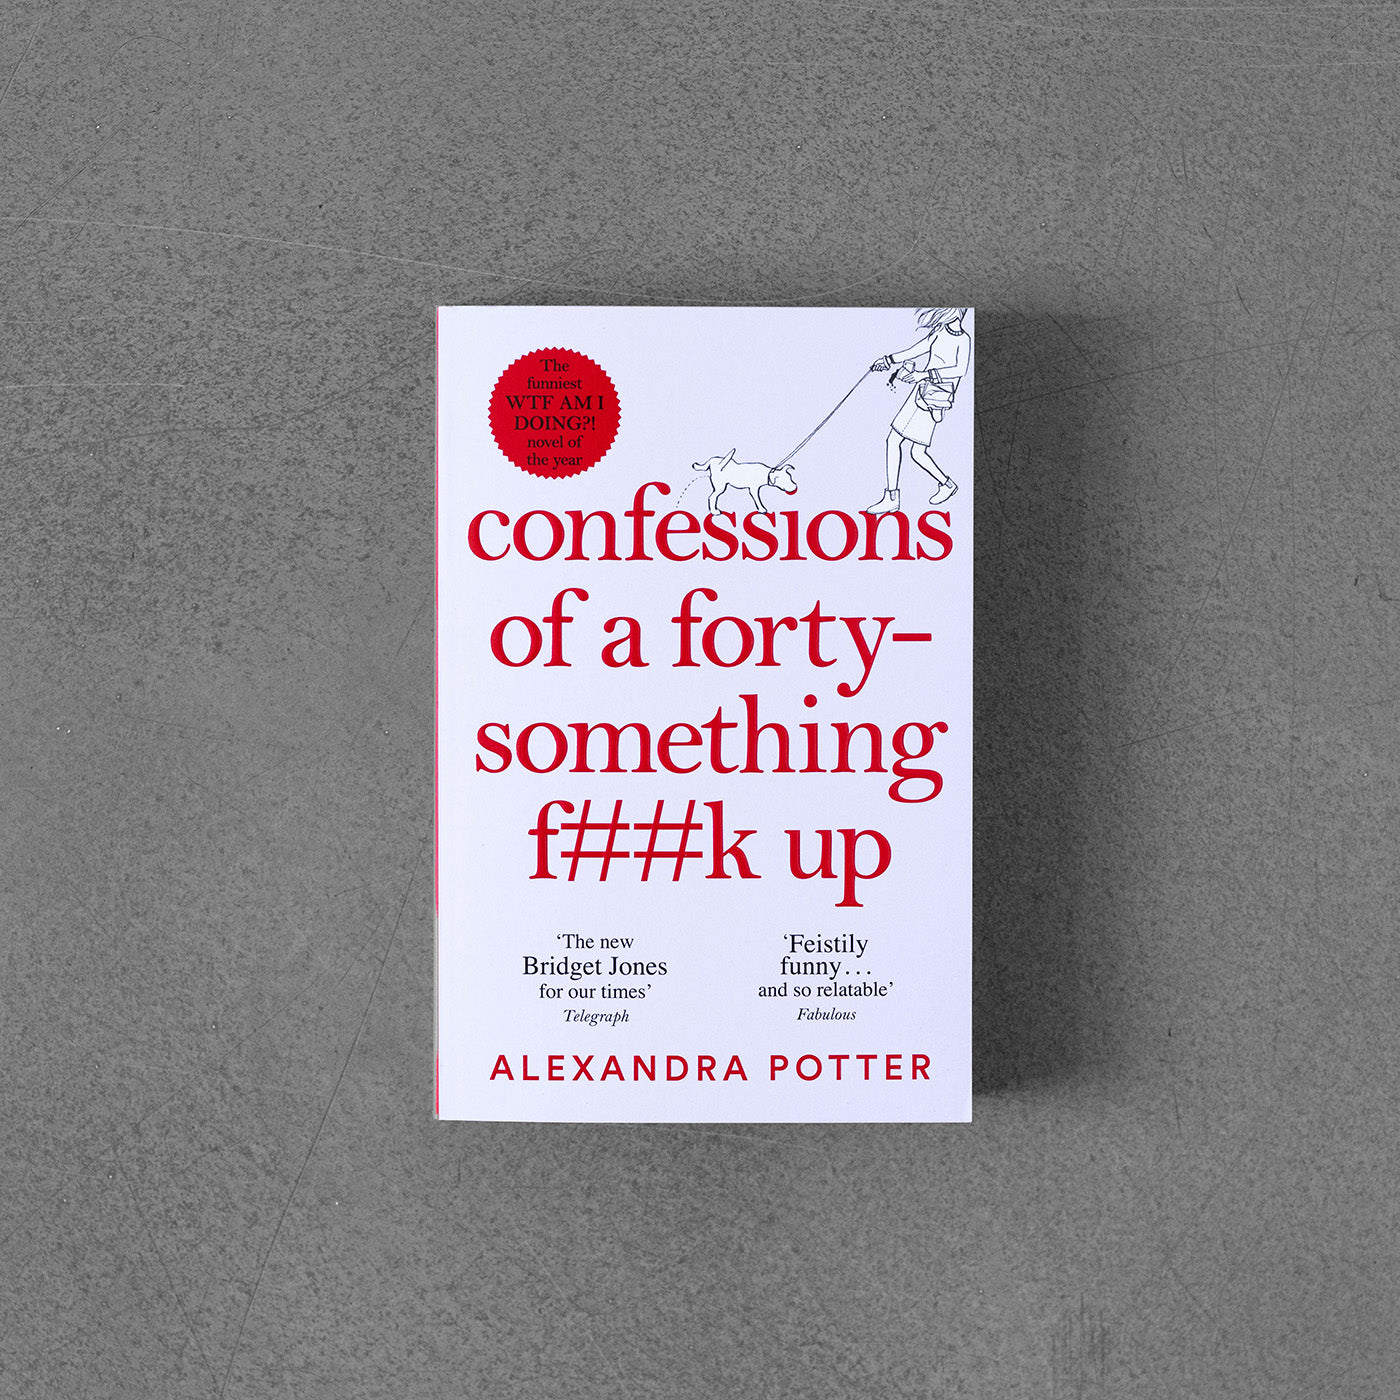 Confessions of a Forty-Something F##k Up, Alexandra Potter